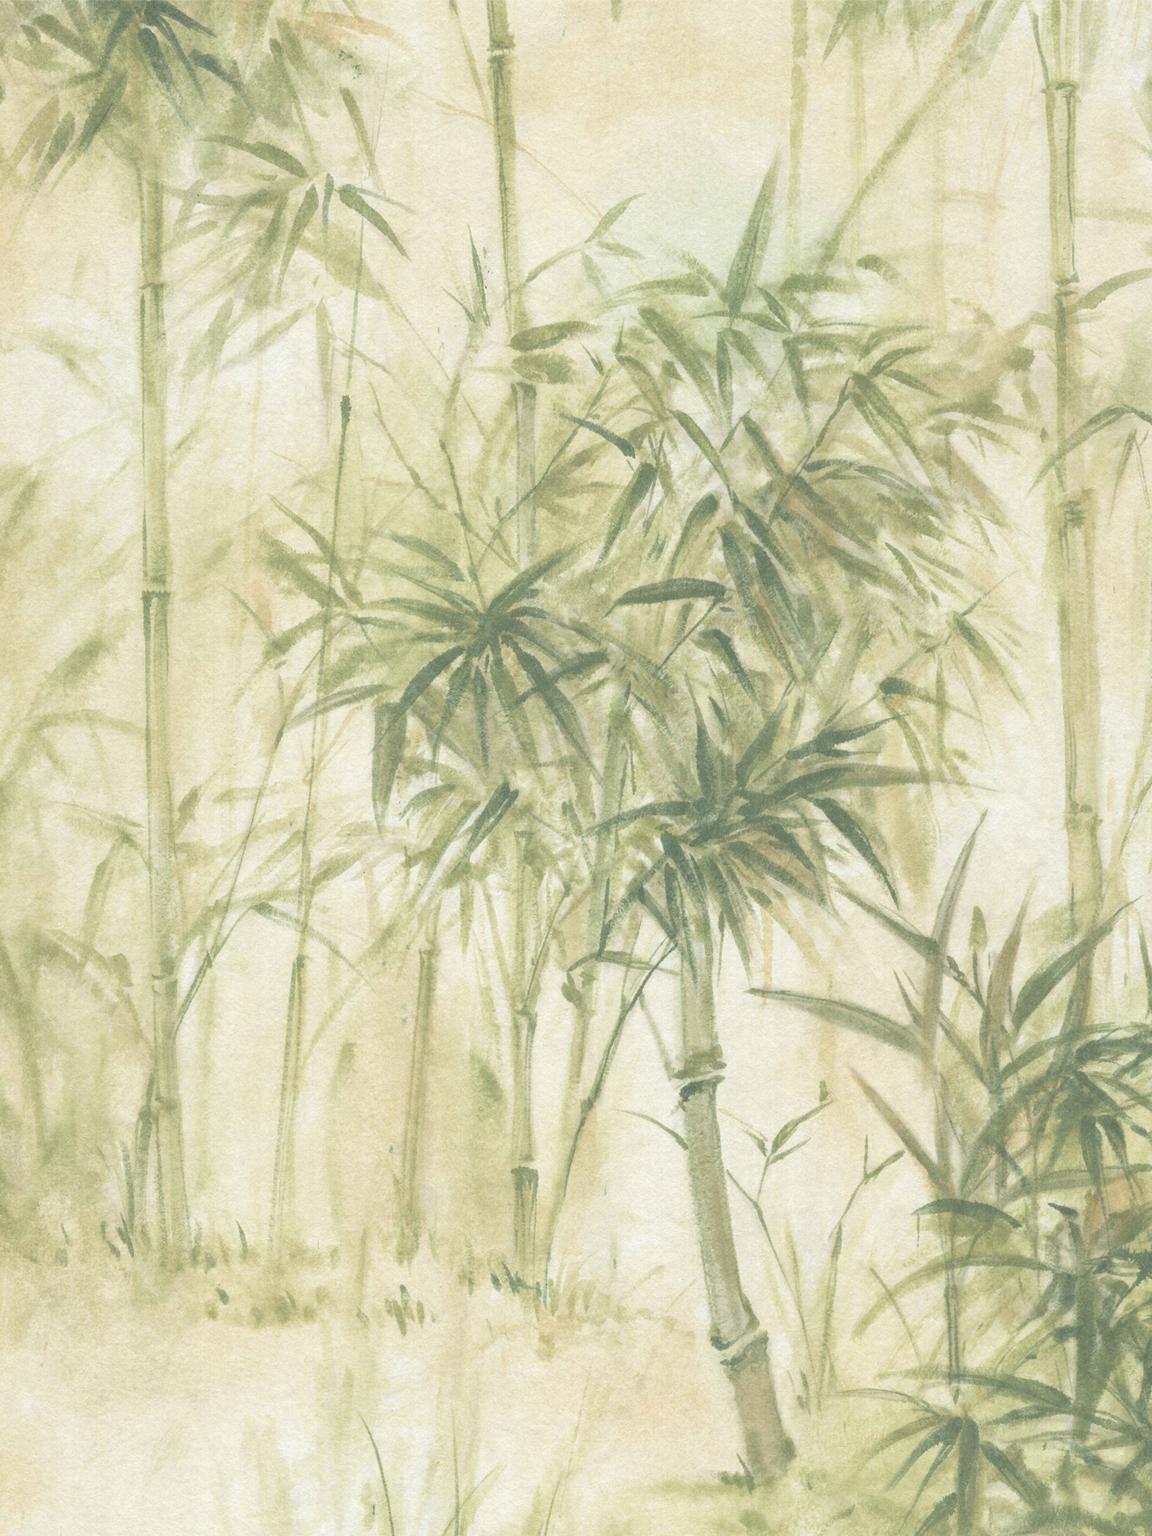 This bamboo forest mural is a set of four panels hand painted on non-woven paper. Each panel measures 36